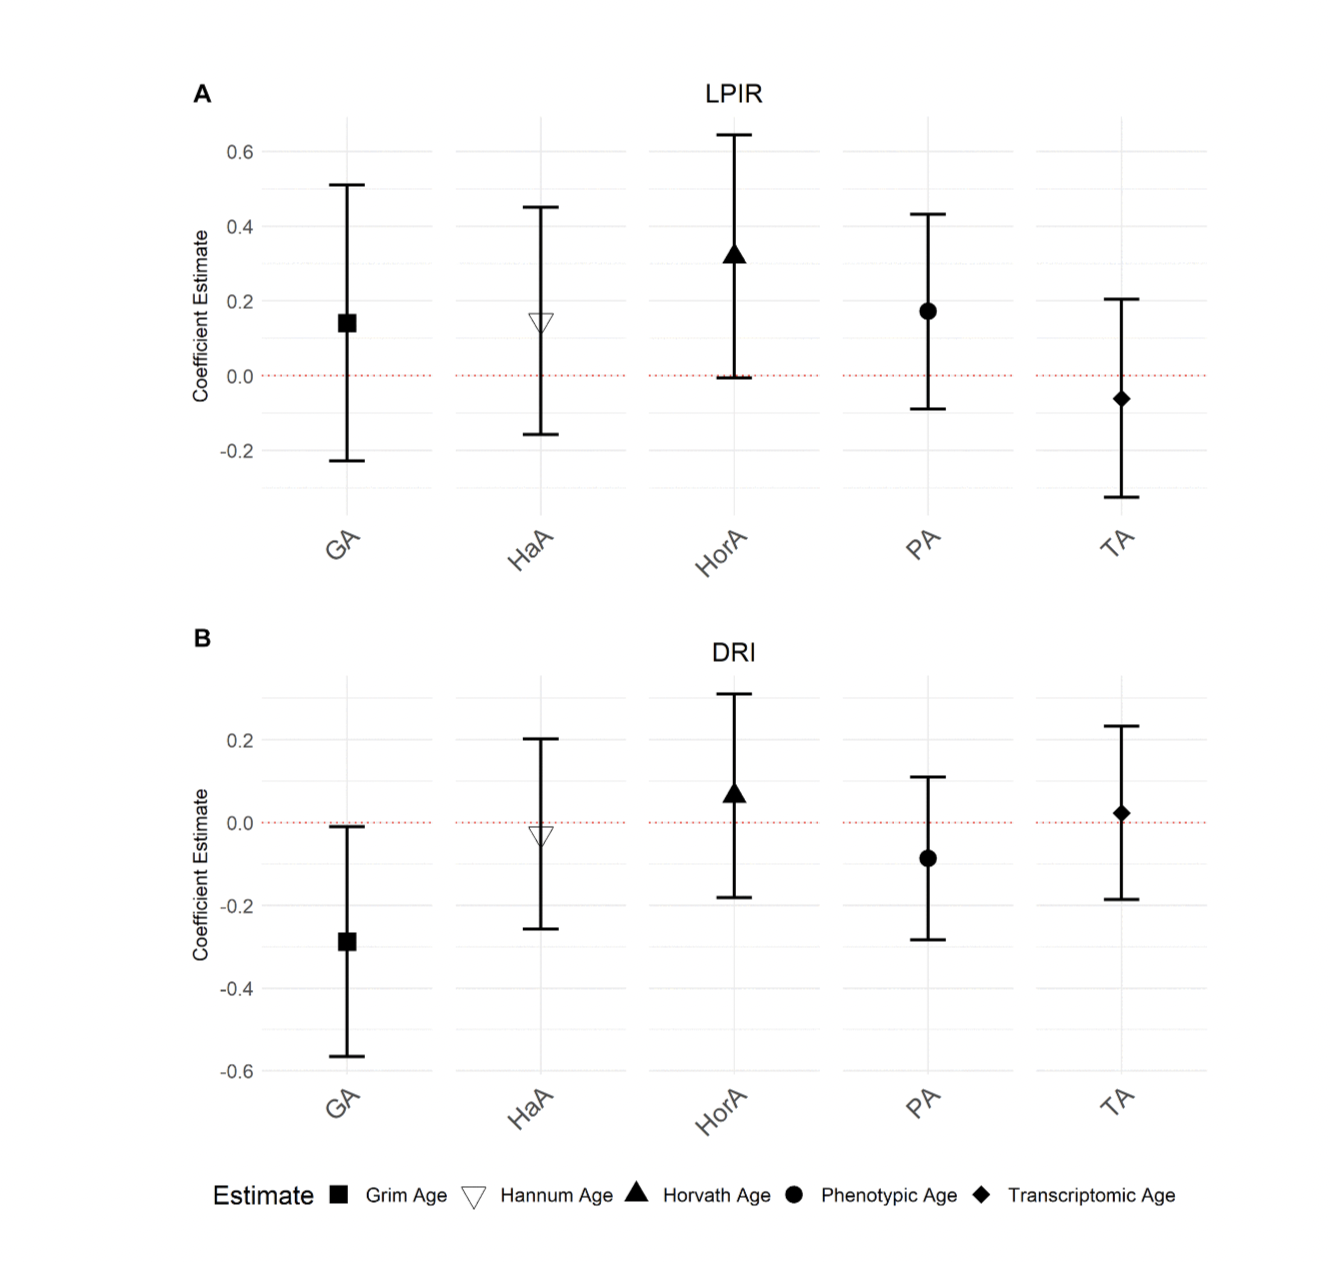 Associations among NMR-measured inflammatory and metabolic biomarkers and accelerated aging in cardiac catheterization patients